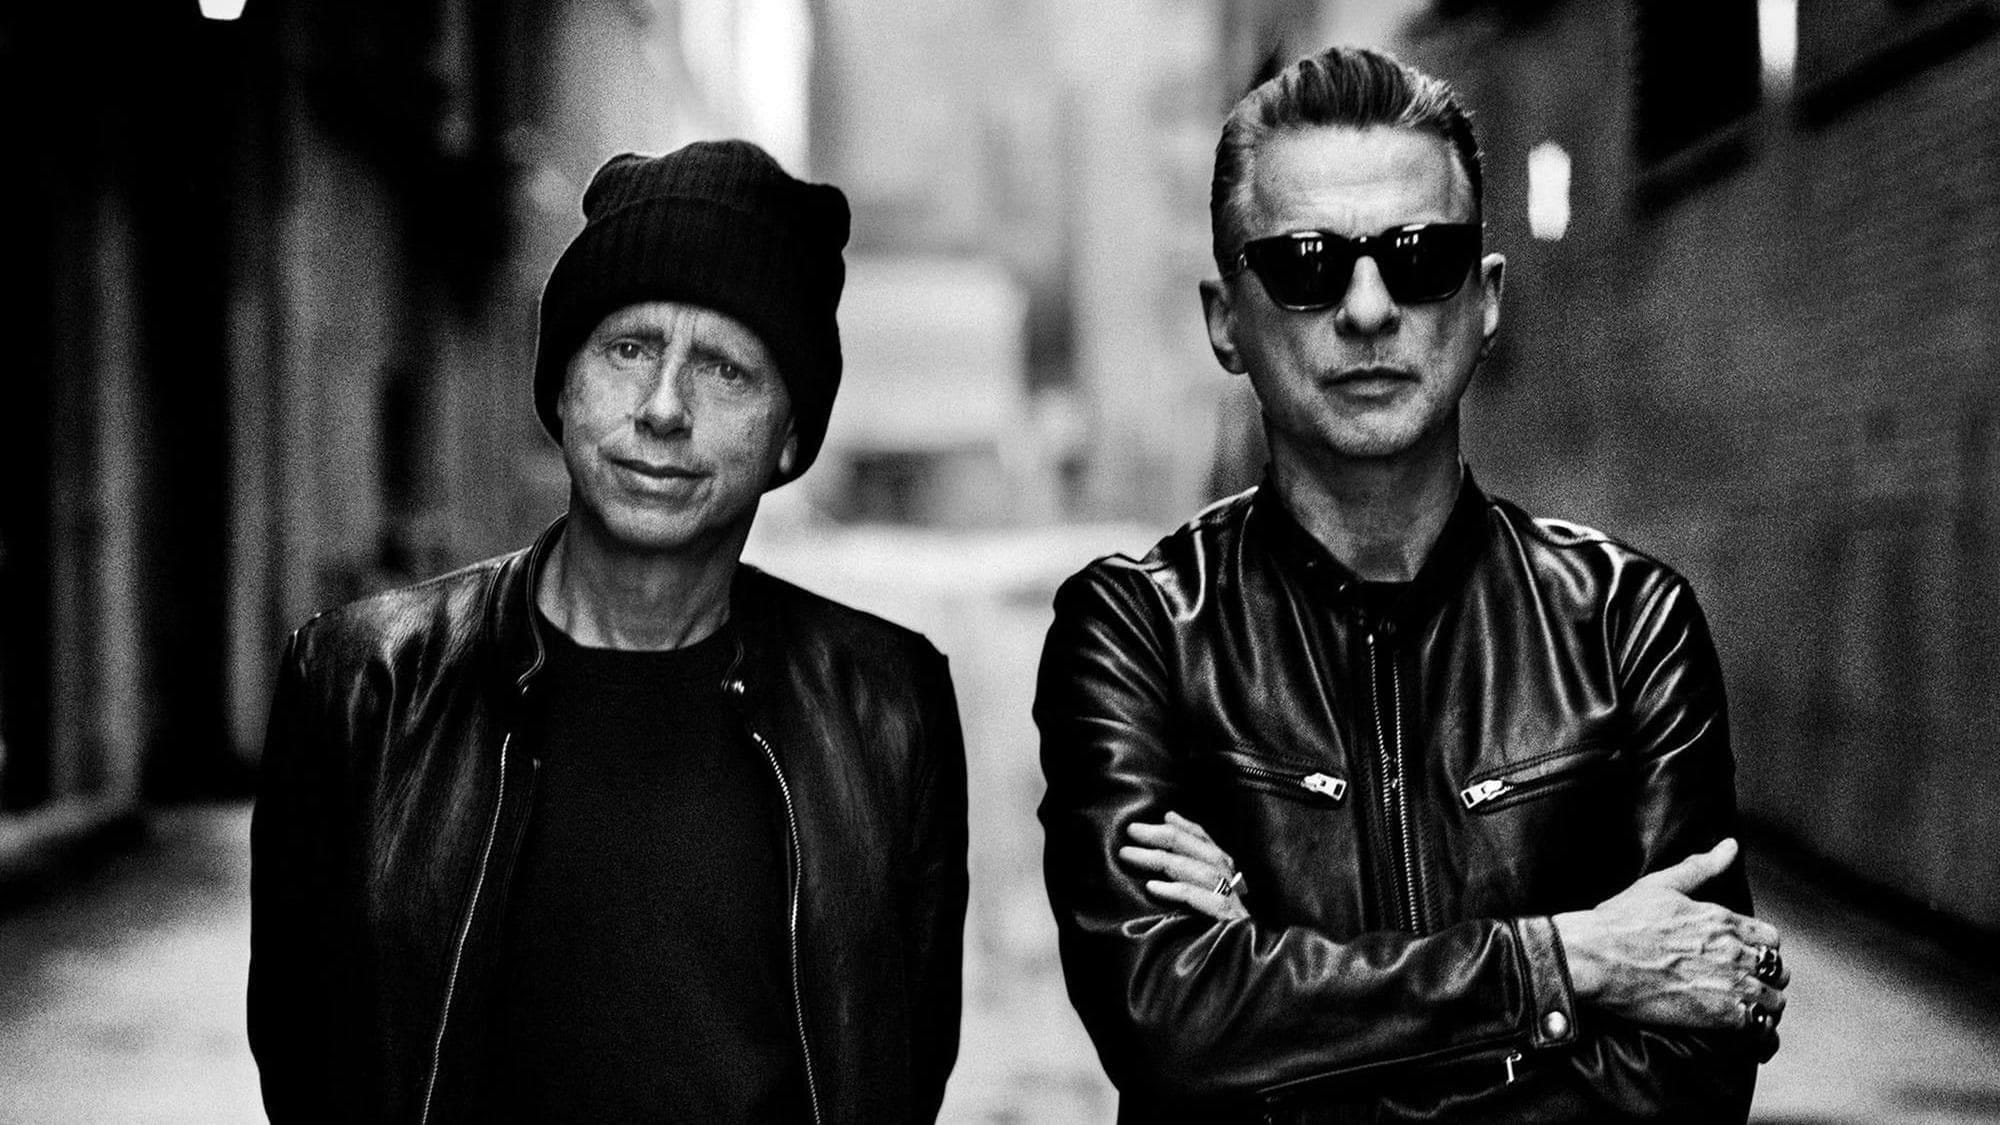 A black-and-white photo of Depeche Mode's Martin Gore and David Gahan standing on a street with an out-of-focus background